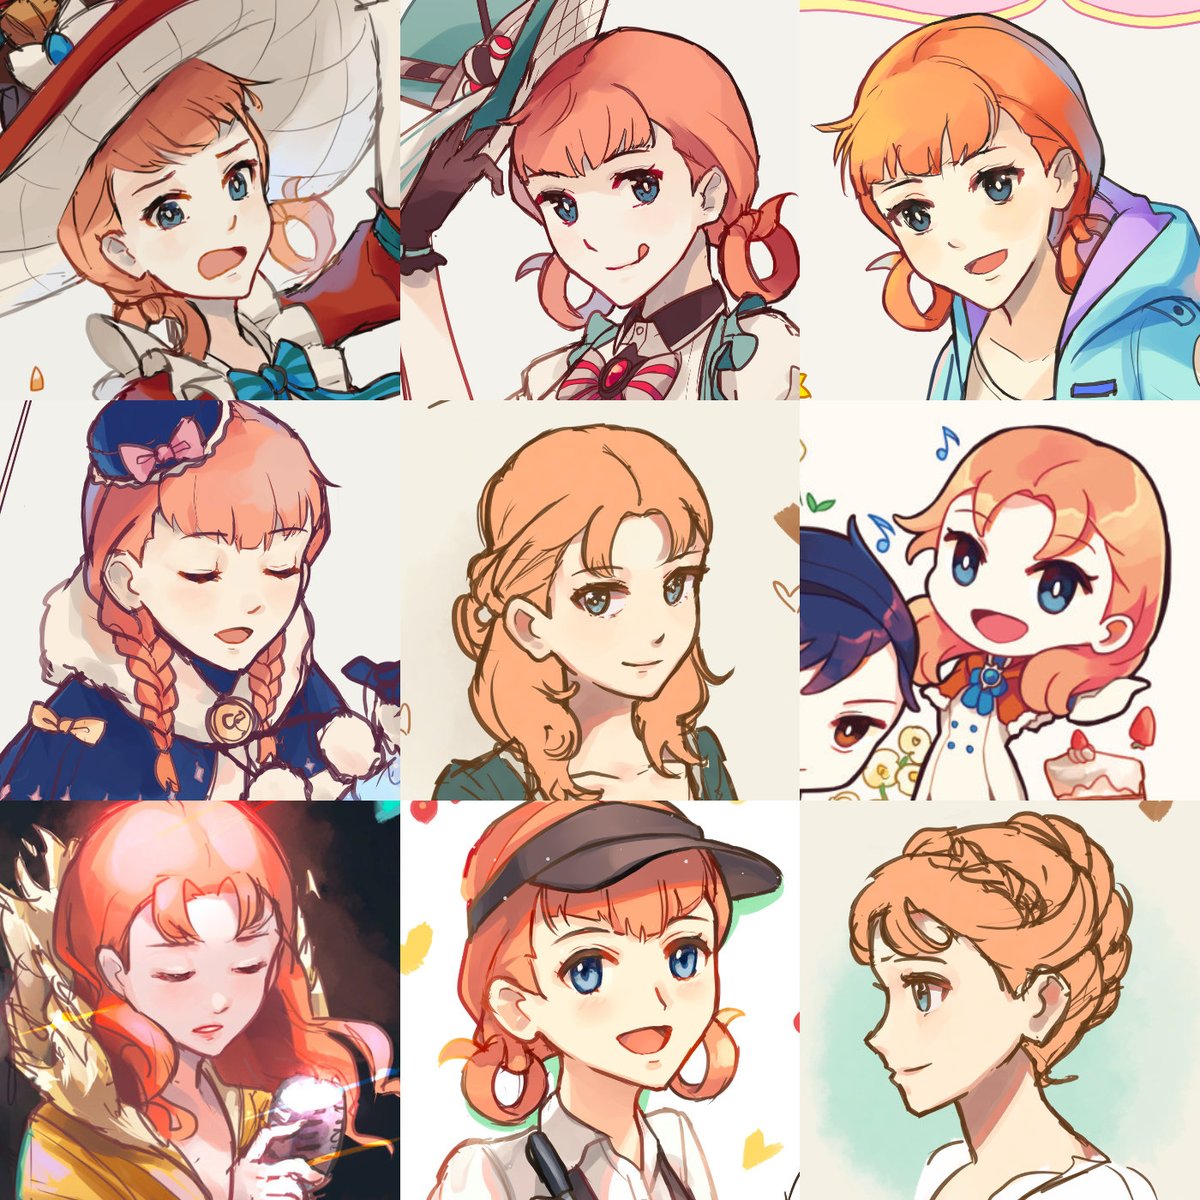 happy #エアFEexpo !!
my favorite character is annette! i've drawn her... just a little bit... ? 